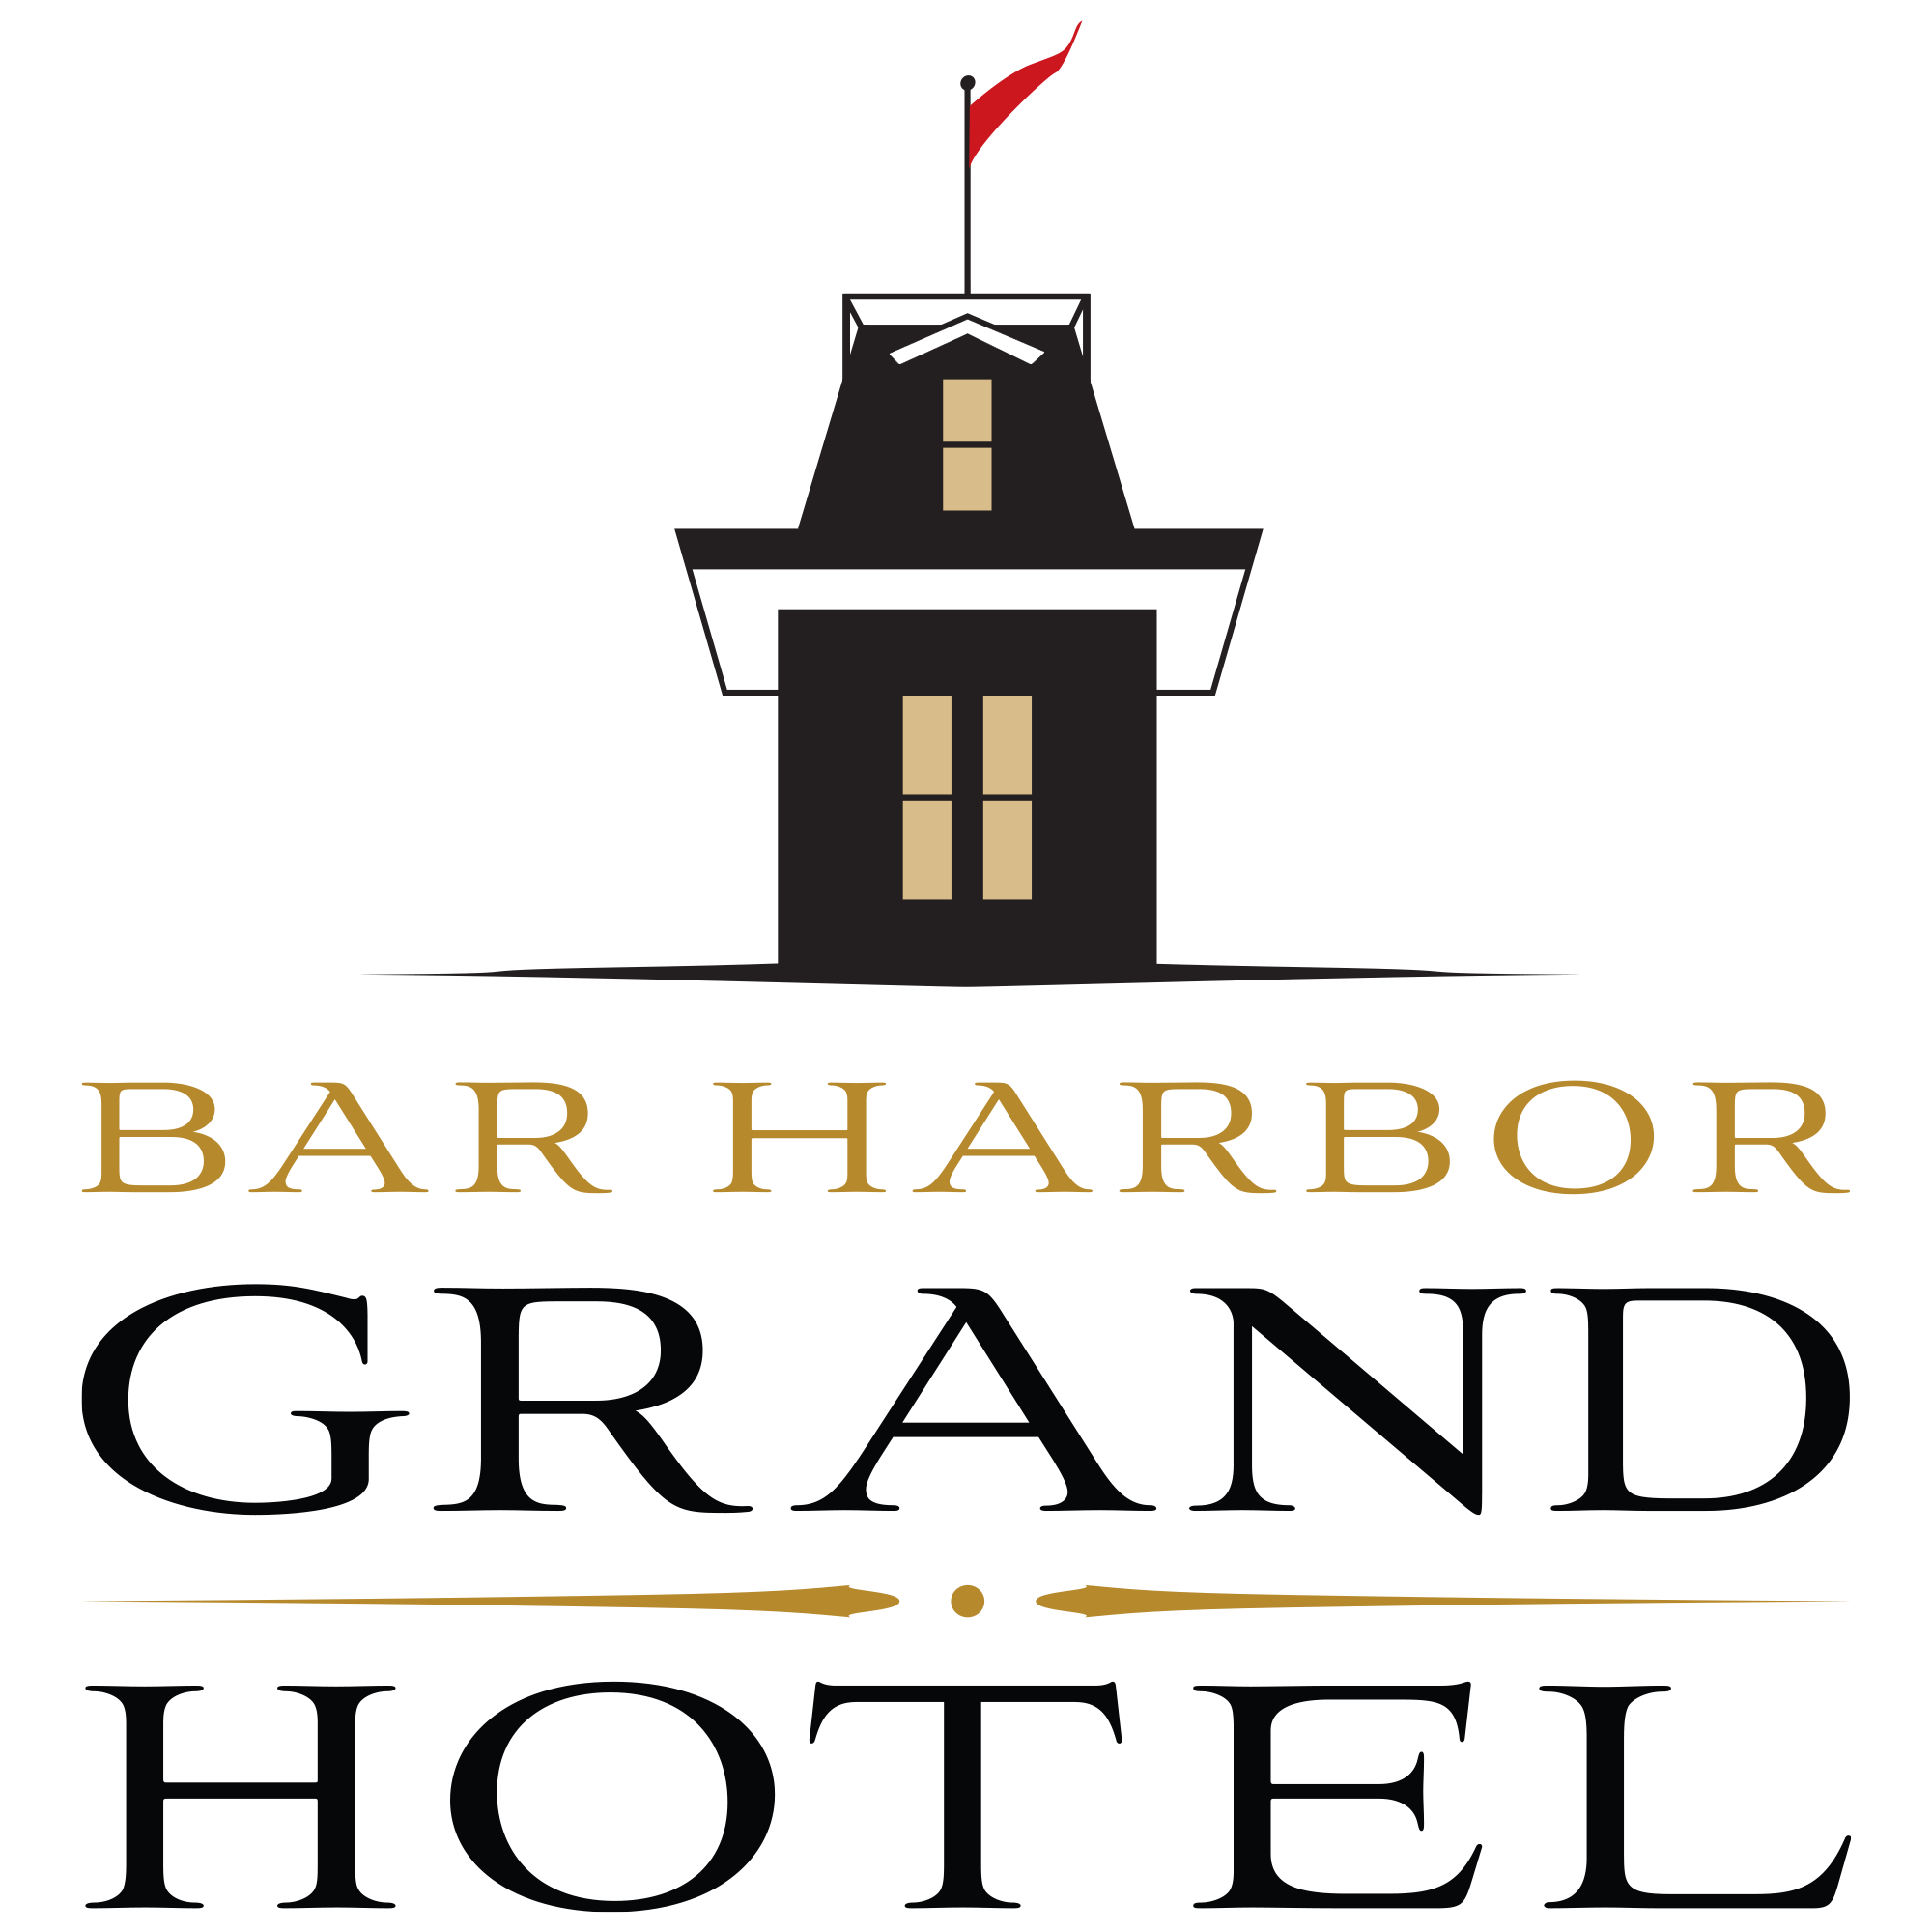 Image of the Bar Harbor Grand Hotel